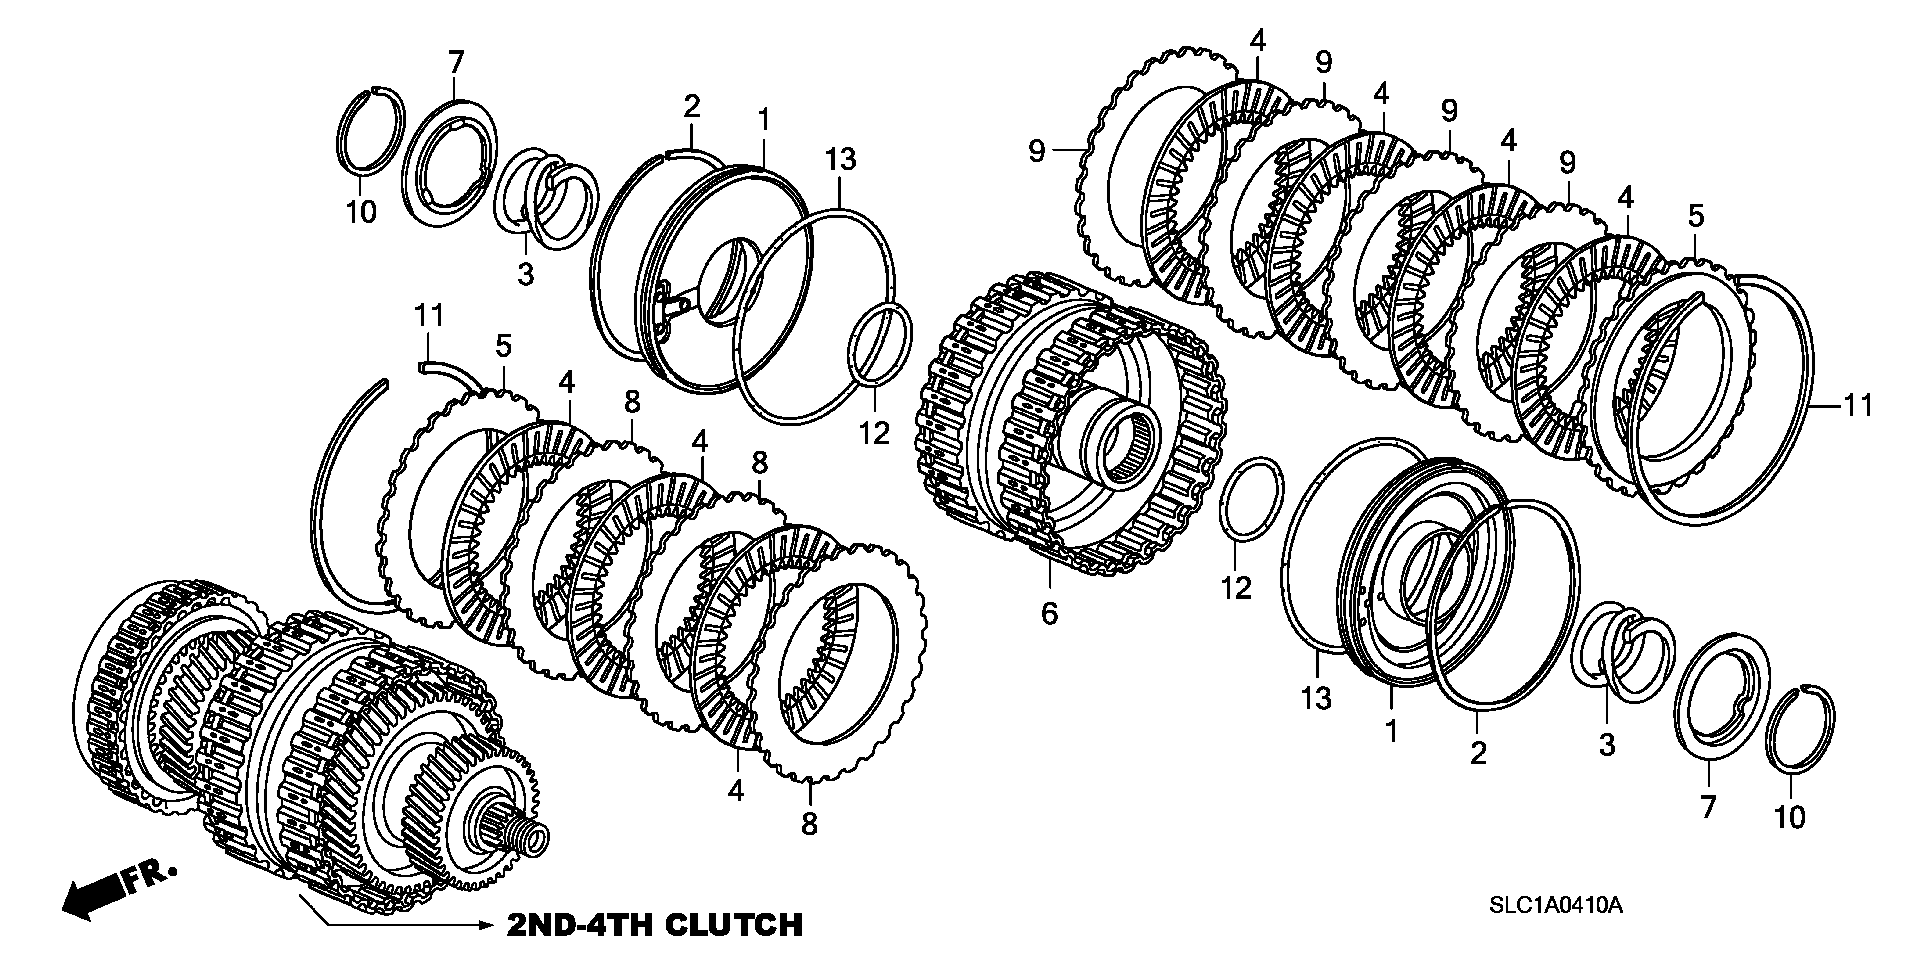 CLUTCH( SECOND FORCE)